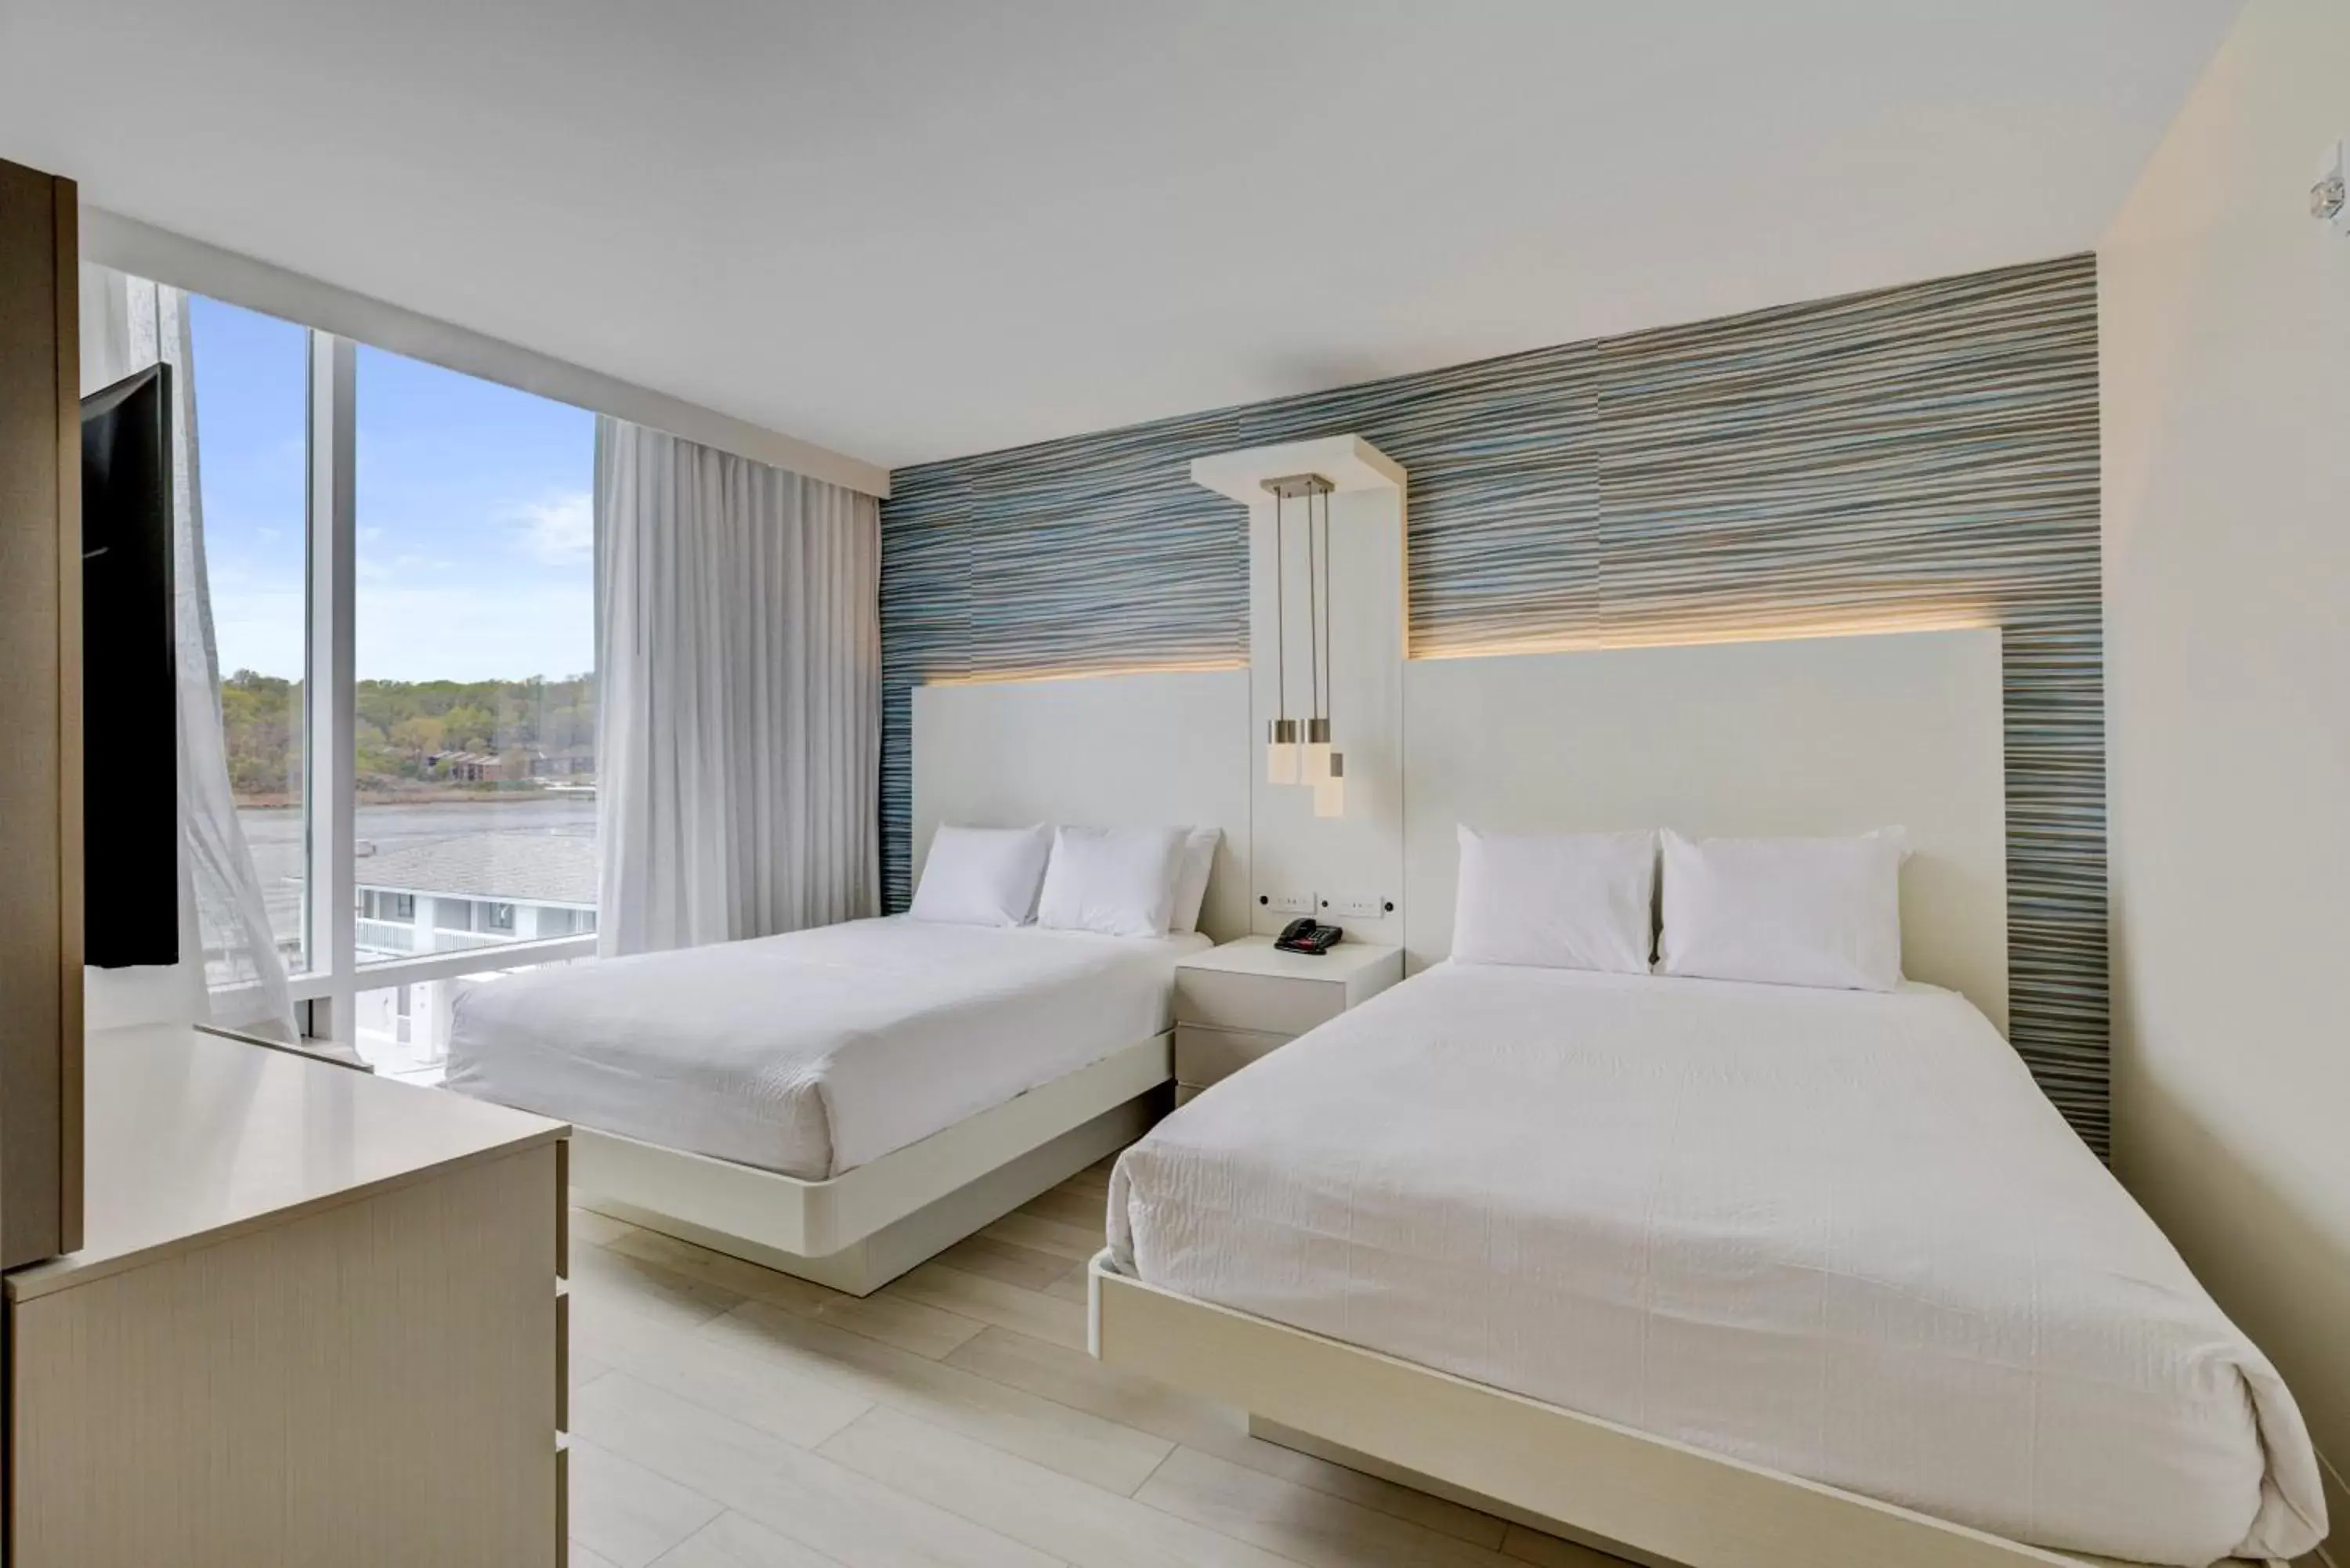 Deluxe Queen Room with Two Queen Beds in BeachWalk at Sea Bright